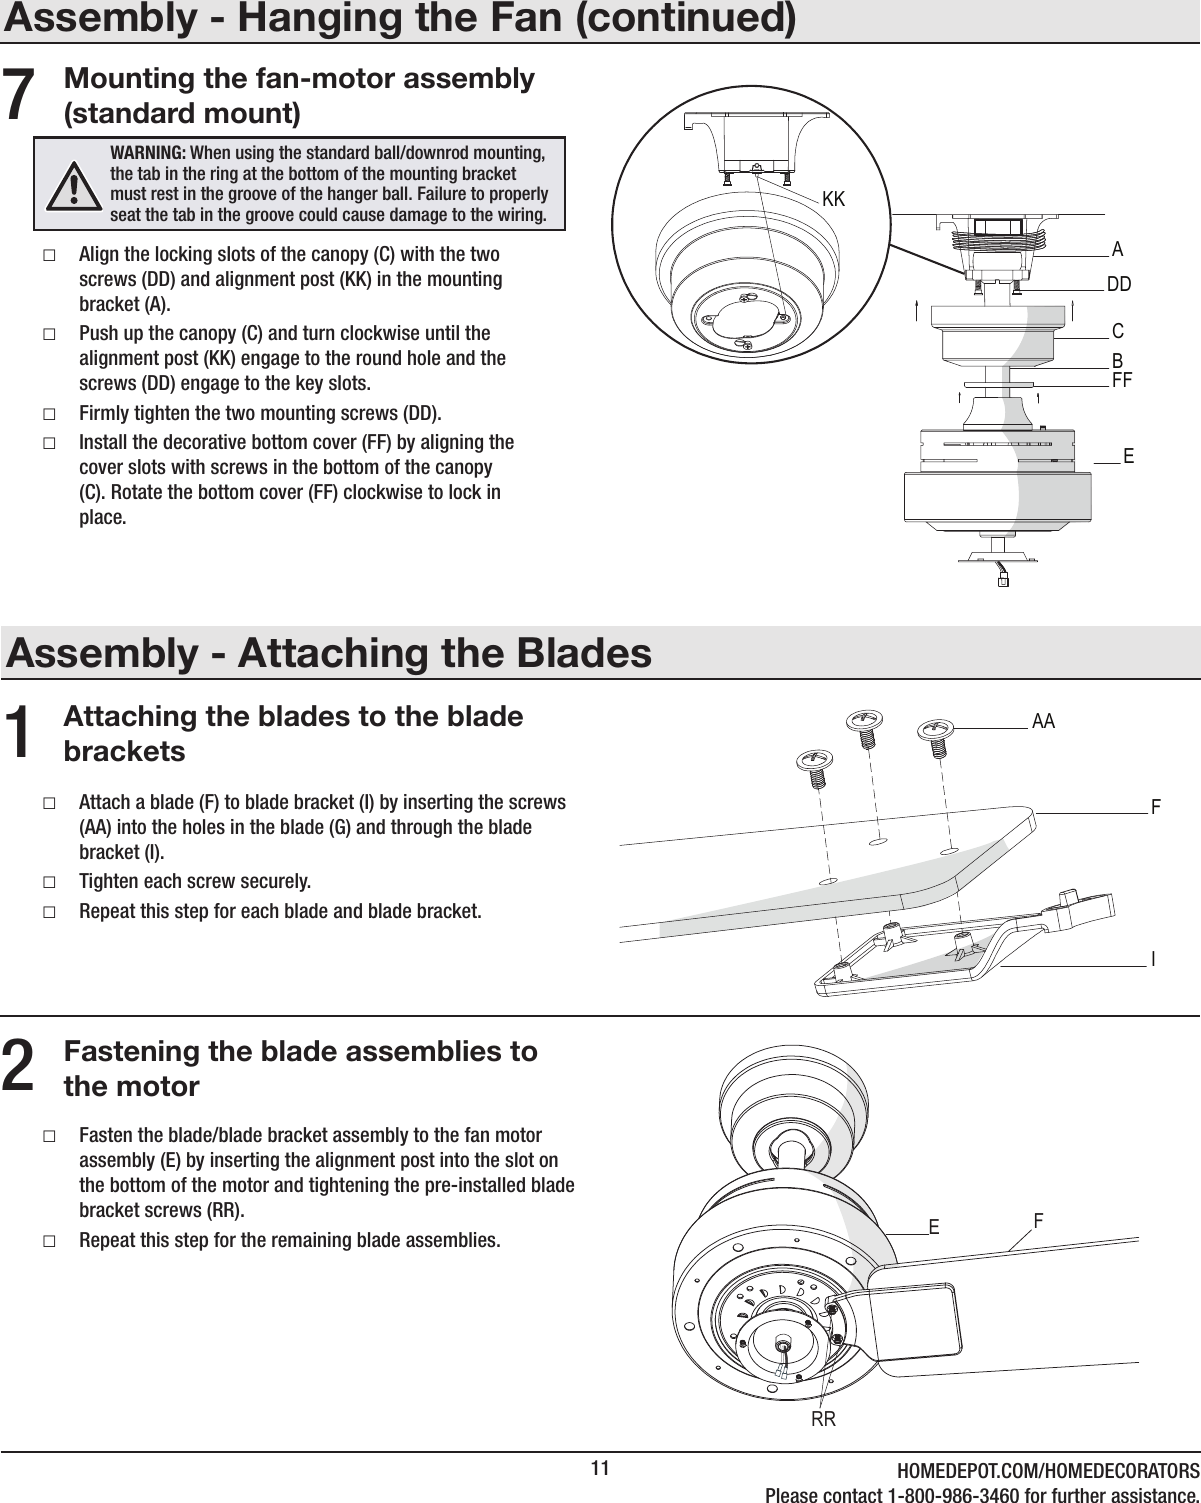 11 HOMEDEPOT.COM/HOMEDECORATORSPlease contact 1-800-986-3460 for further assistance.Assembly - Attaching the BladesAttaching the blades to the blade brackets1 □Attach a blade (F) to blade bracket (I) by inserting the screws (AA) into the holes in the blade (G) and through the blade bracket (I). □Tighten each screw securely. □Repeat this step for each blade and blade bracket.Fastening the blade assemblies to the motor2 □Fasten the blade/blade bracket assembly to the fan motor assembly (E) by inserting the alignment post into the slot on the bottom of the motor and tightening the pre-installed blade bracket screws (RR). □Repeat this step for the remaining blade assemblies.Assembly - Hanging the Fan (continued)Mounting the fan-motor assembly (standard mount) □Align the locking slots of the canopy (C) with the two screws (DD) and alignment post (KK) in the mounting bracket (A). □Push up the canopy (C) and turn clockwise until the alignment post (KK) engage to the round hole and the screws (DD) engage to the key slots. □Firmly tighten the two mounting screws (DD). □Install the decorative bottom cover (FF) by aligning the cover slots with screws in the bottom of the canopy (C). Rotate the bottom cover (FF) clockwise to lock in place.7WARNING: When using the standard ball/downrod mounting, the tab in the ring at the bottom of the mounting bracket must rest in the groove of the hanger ball. Failure to properly seat the tab in the groove could cause damage to the wiring. KKADDCBFFEIFAARREF